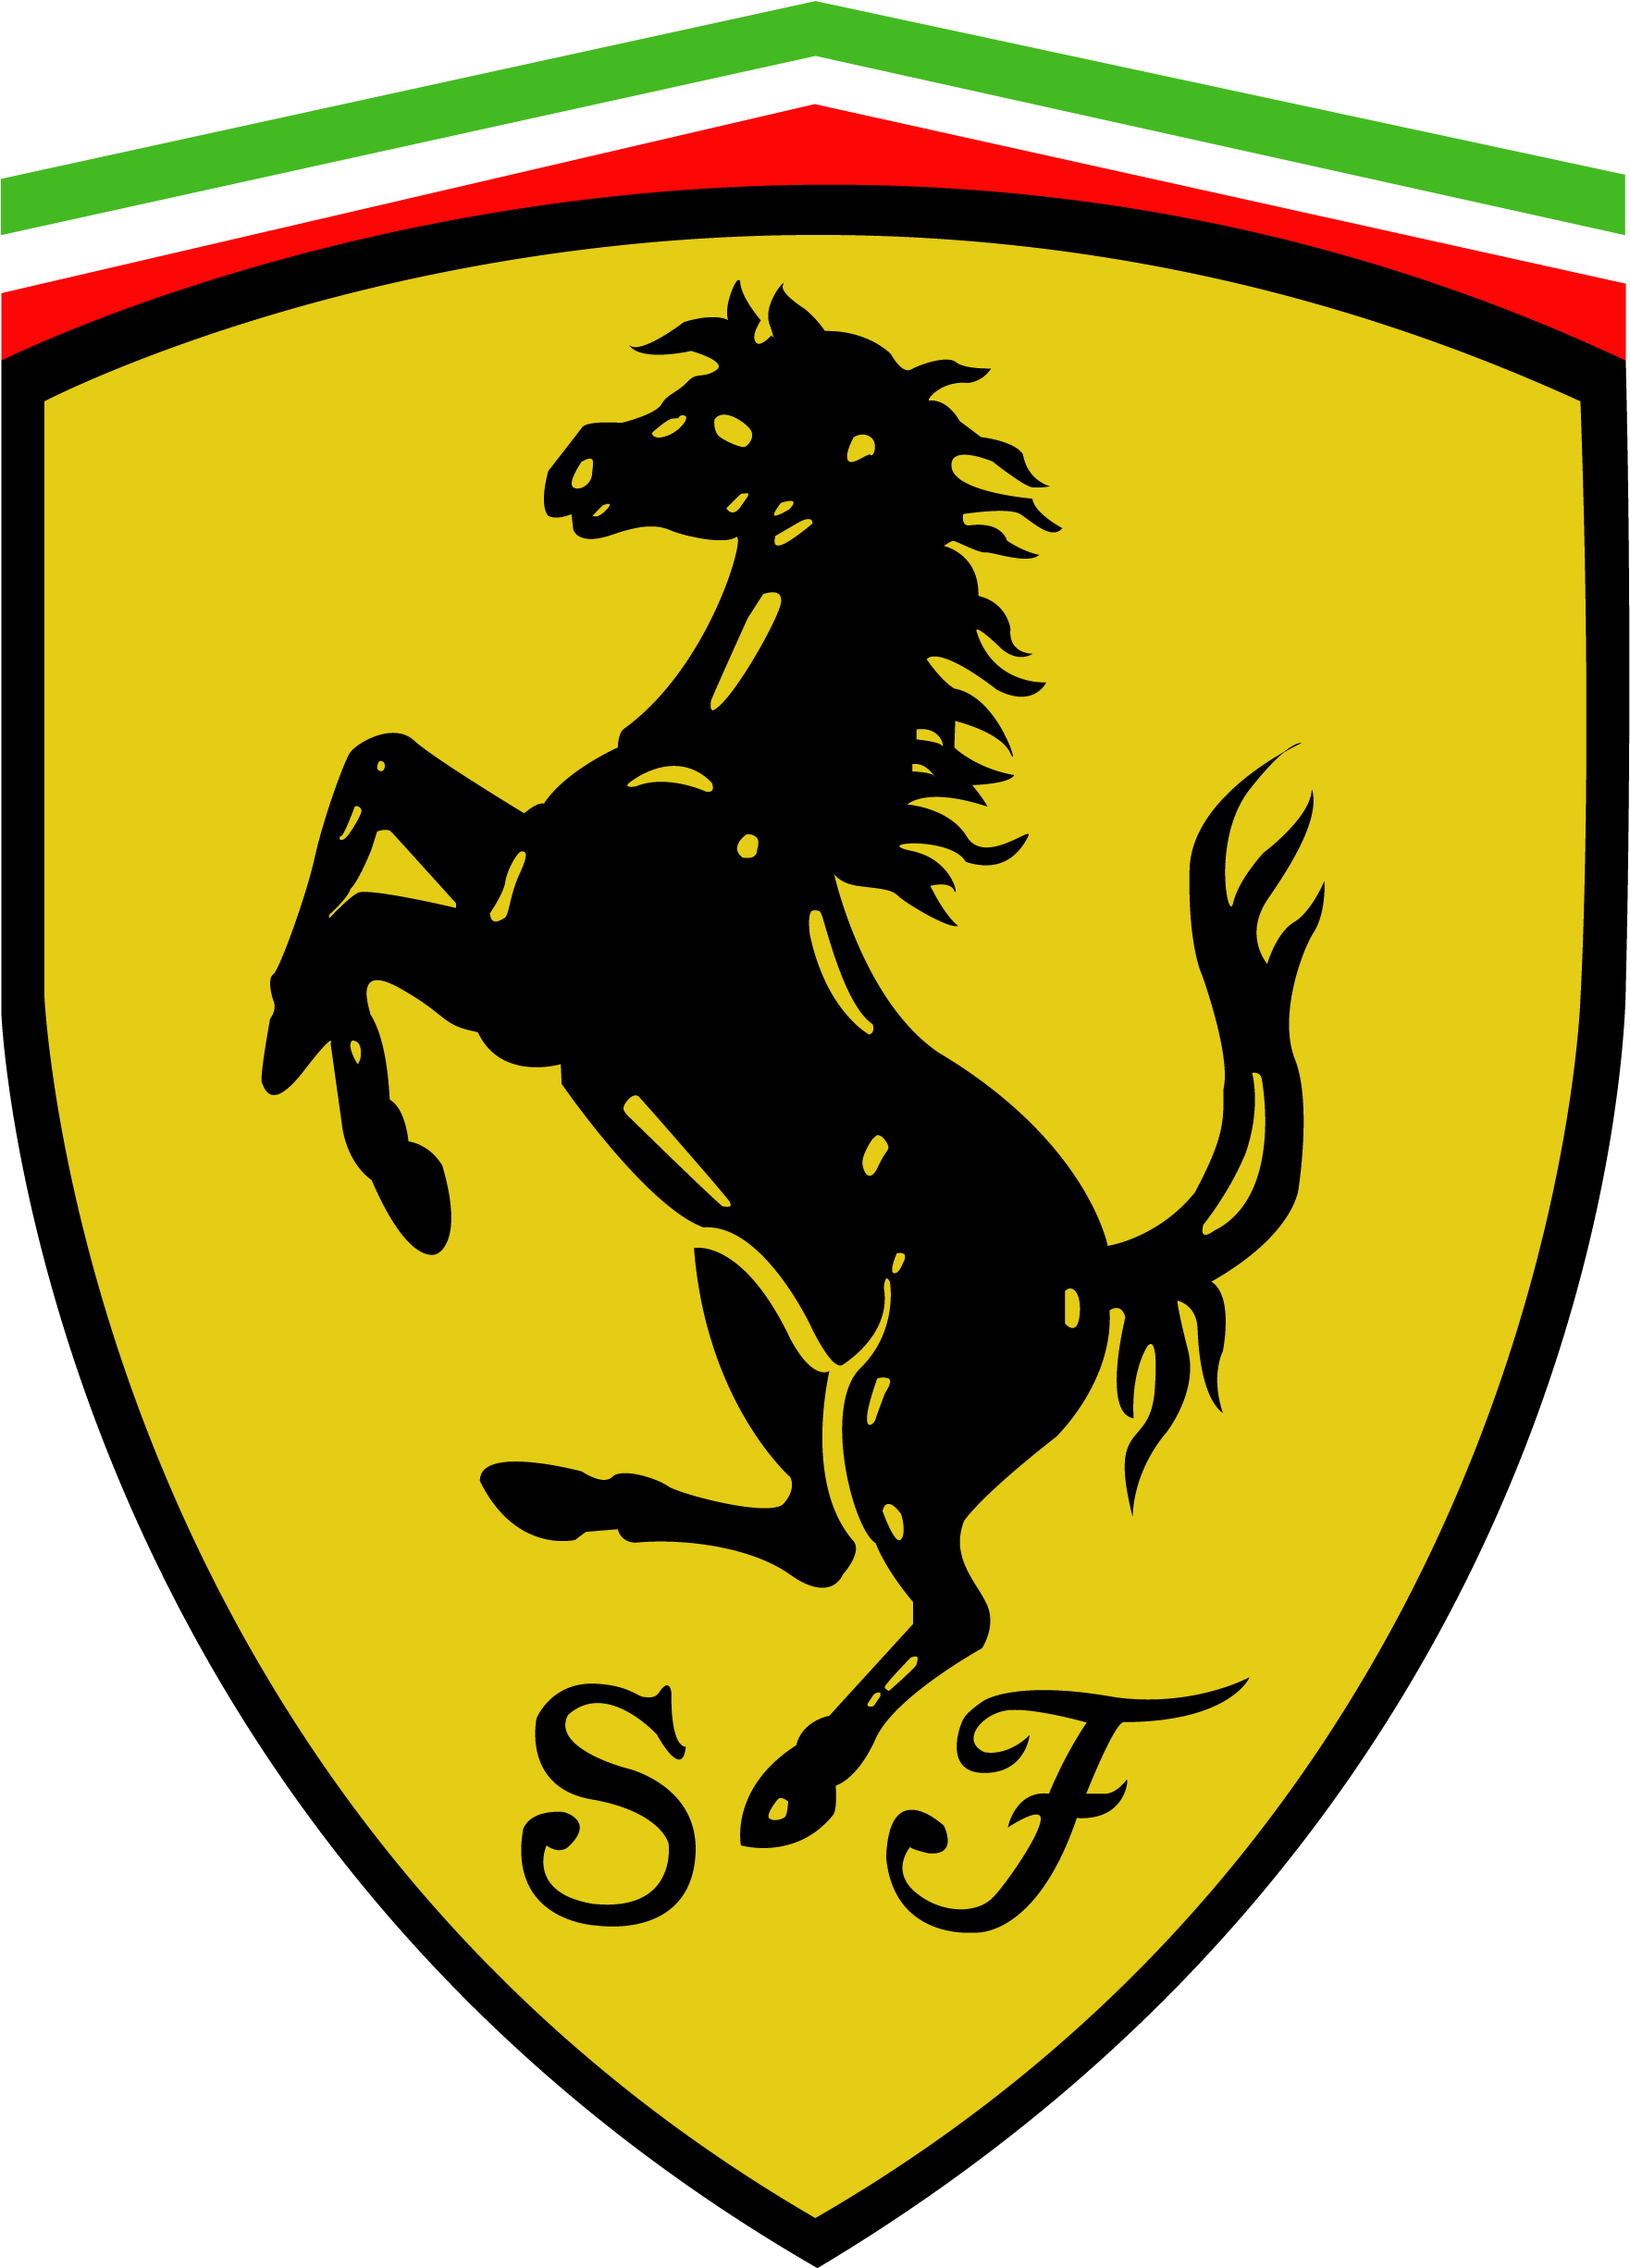 A Black Horse On A Yellow Shield